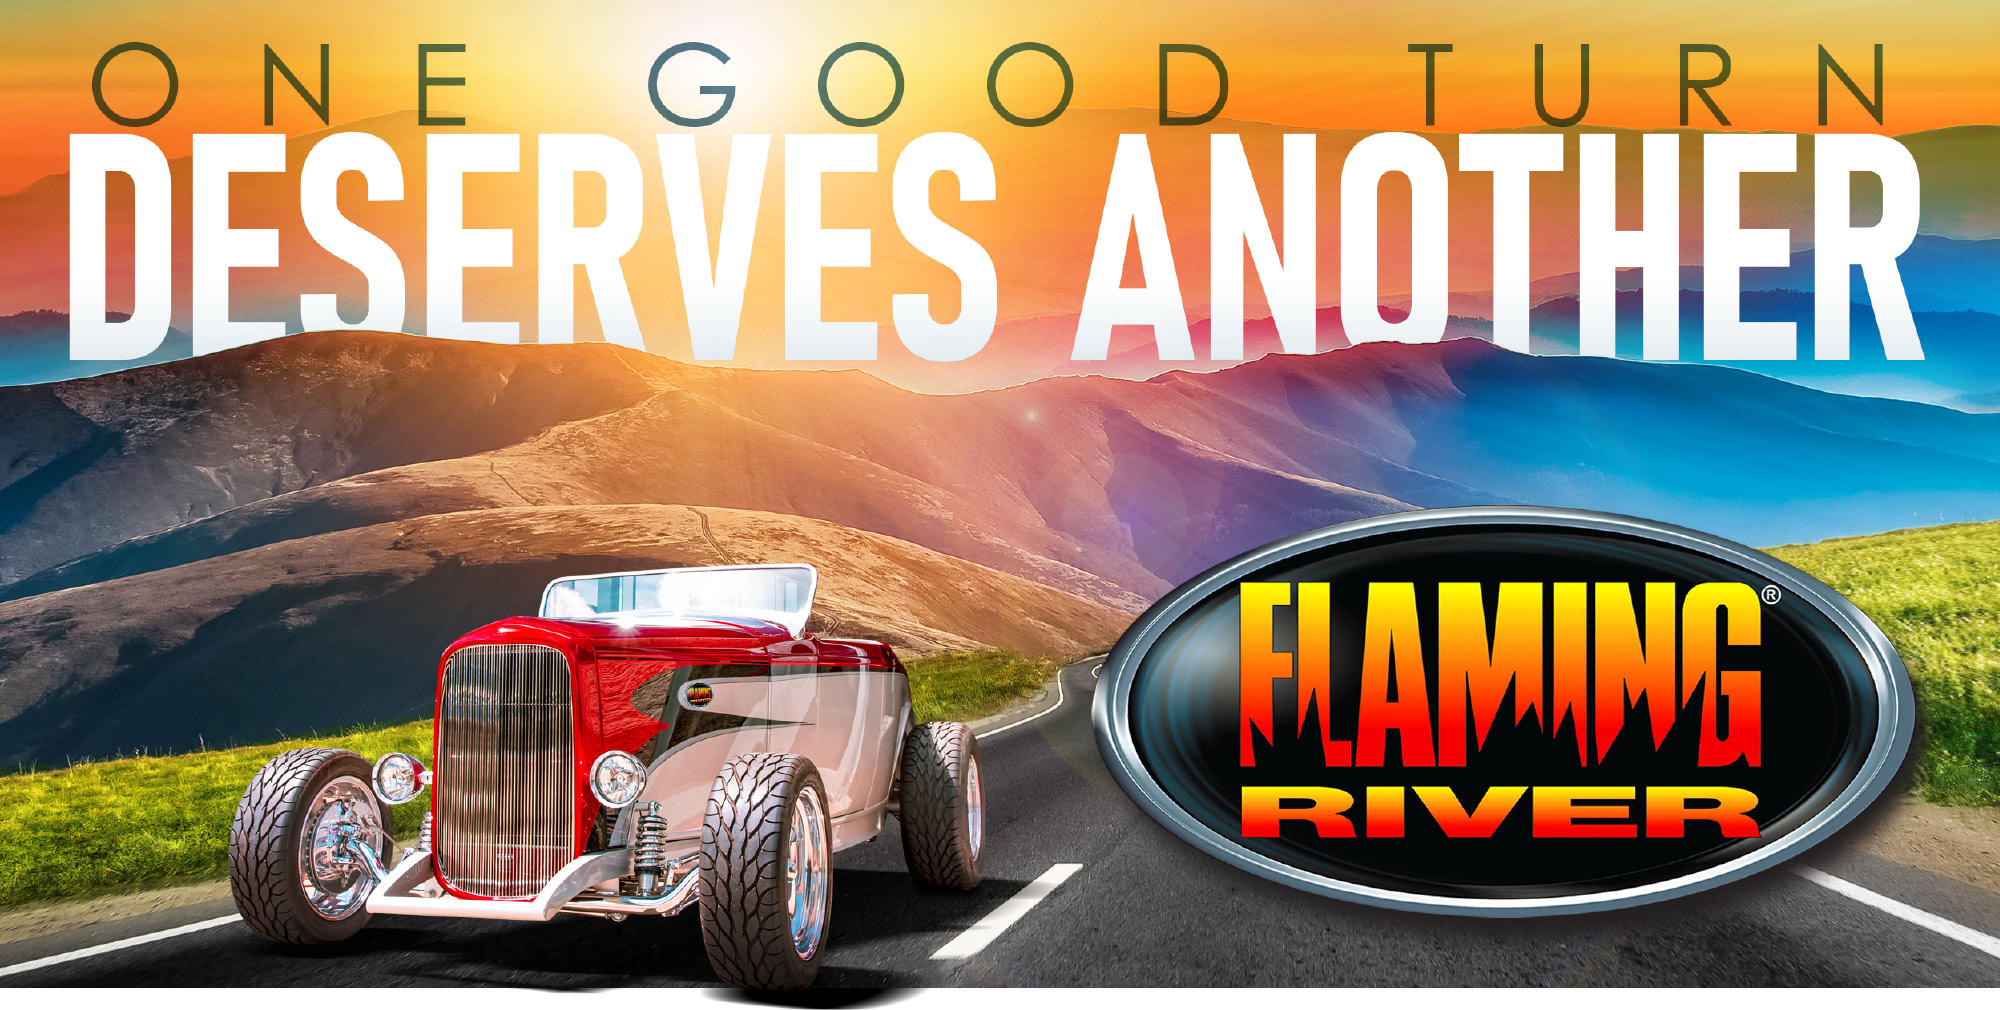 Flaming River: One good turn deserves another